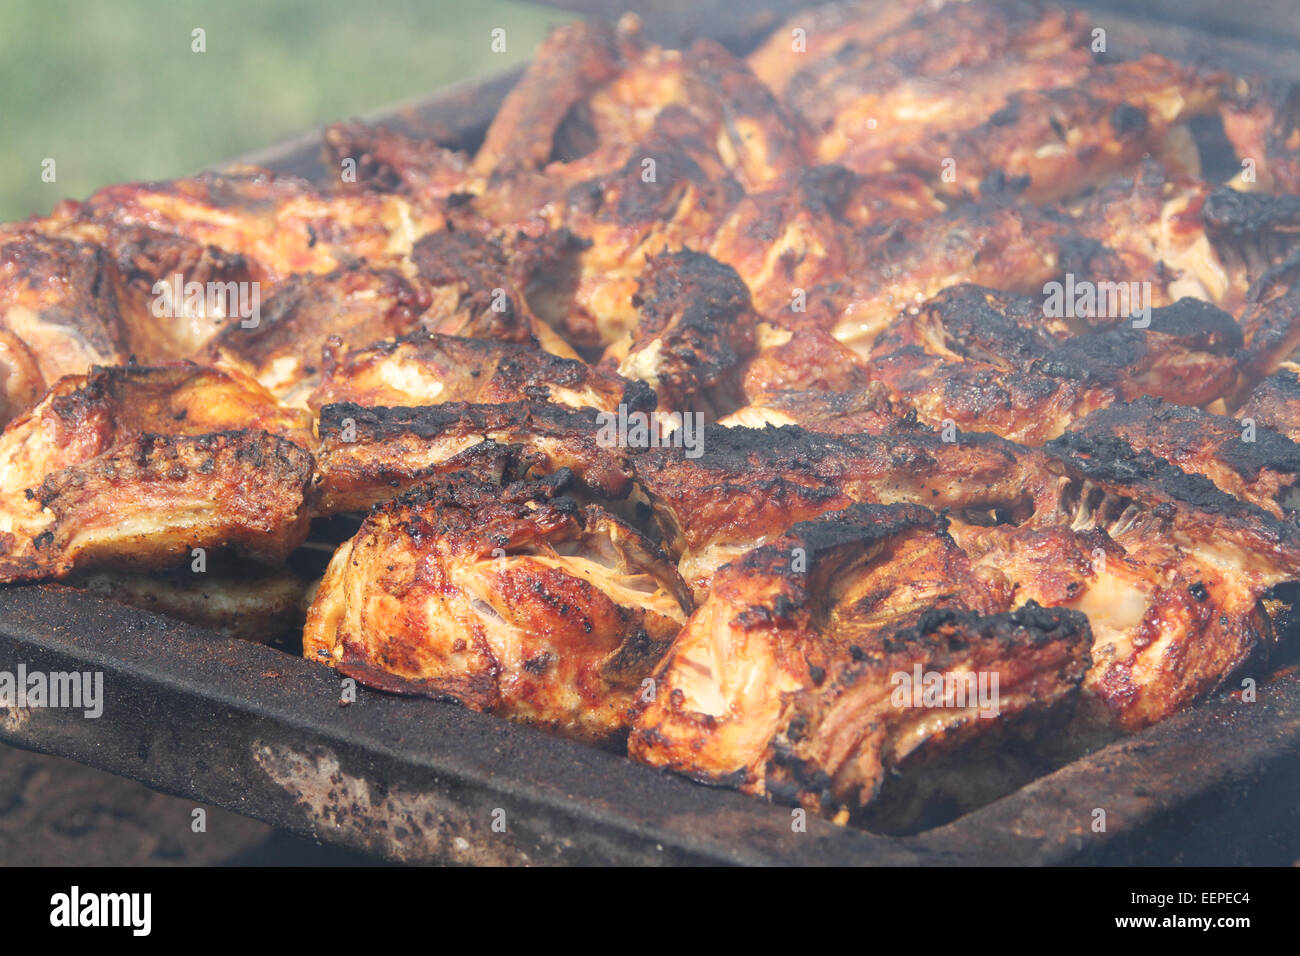 BBQ Chicken. Food Service by Duffield United Methodist Church. Purdy Field Fly-In. August 2014. Michigan Ultralight Association. Stock Photo